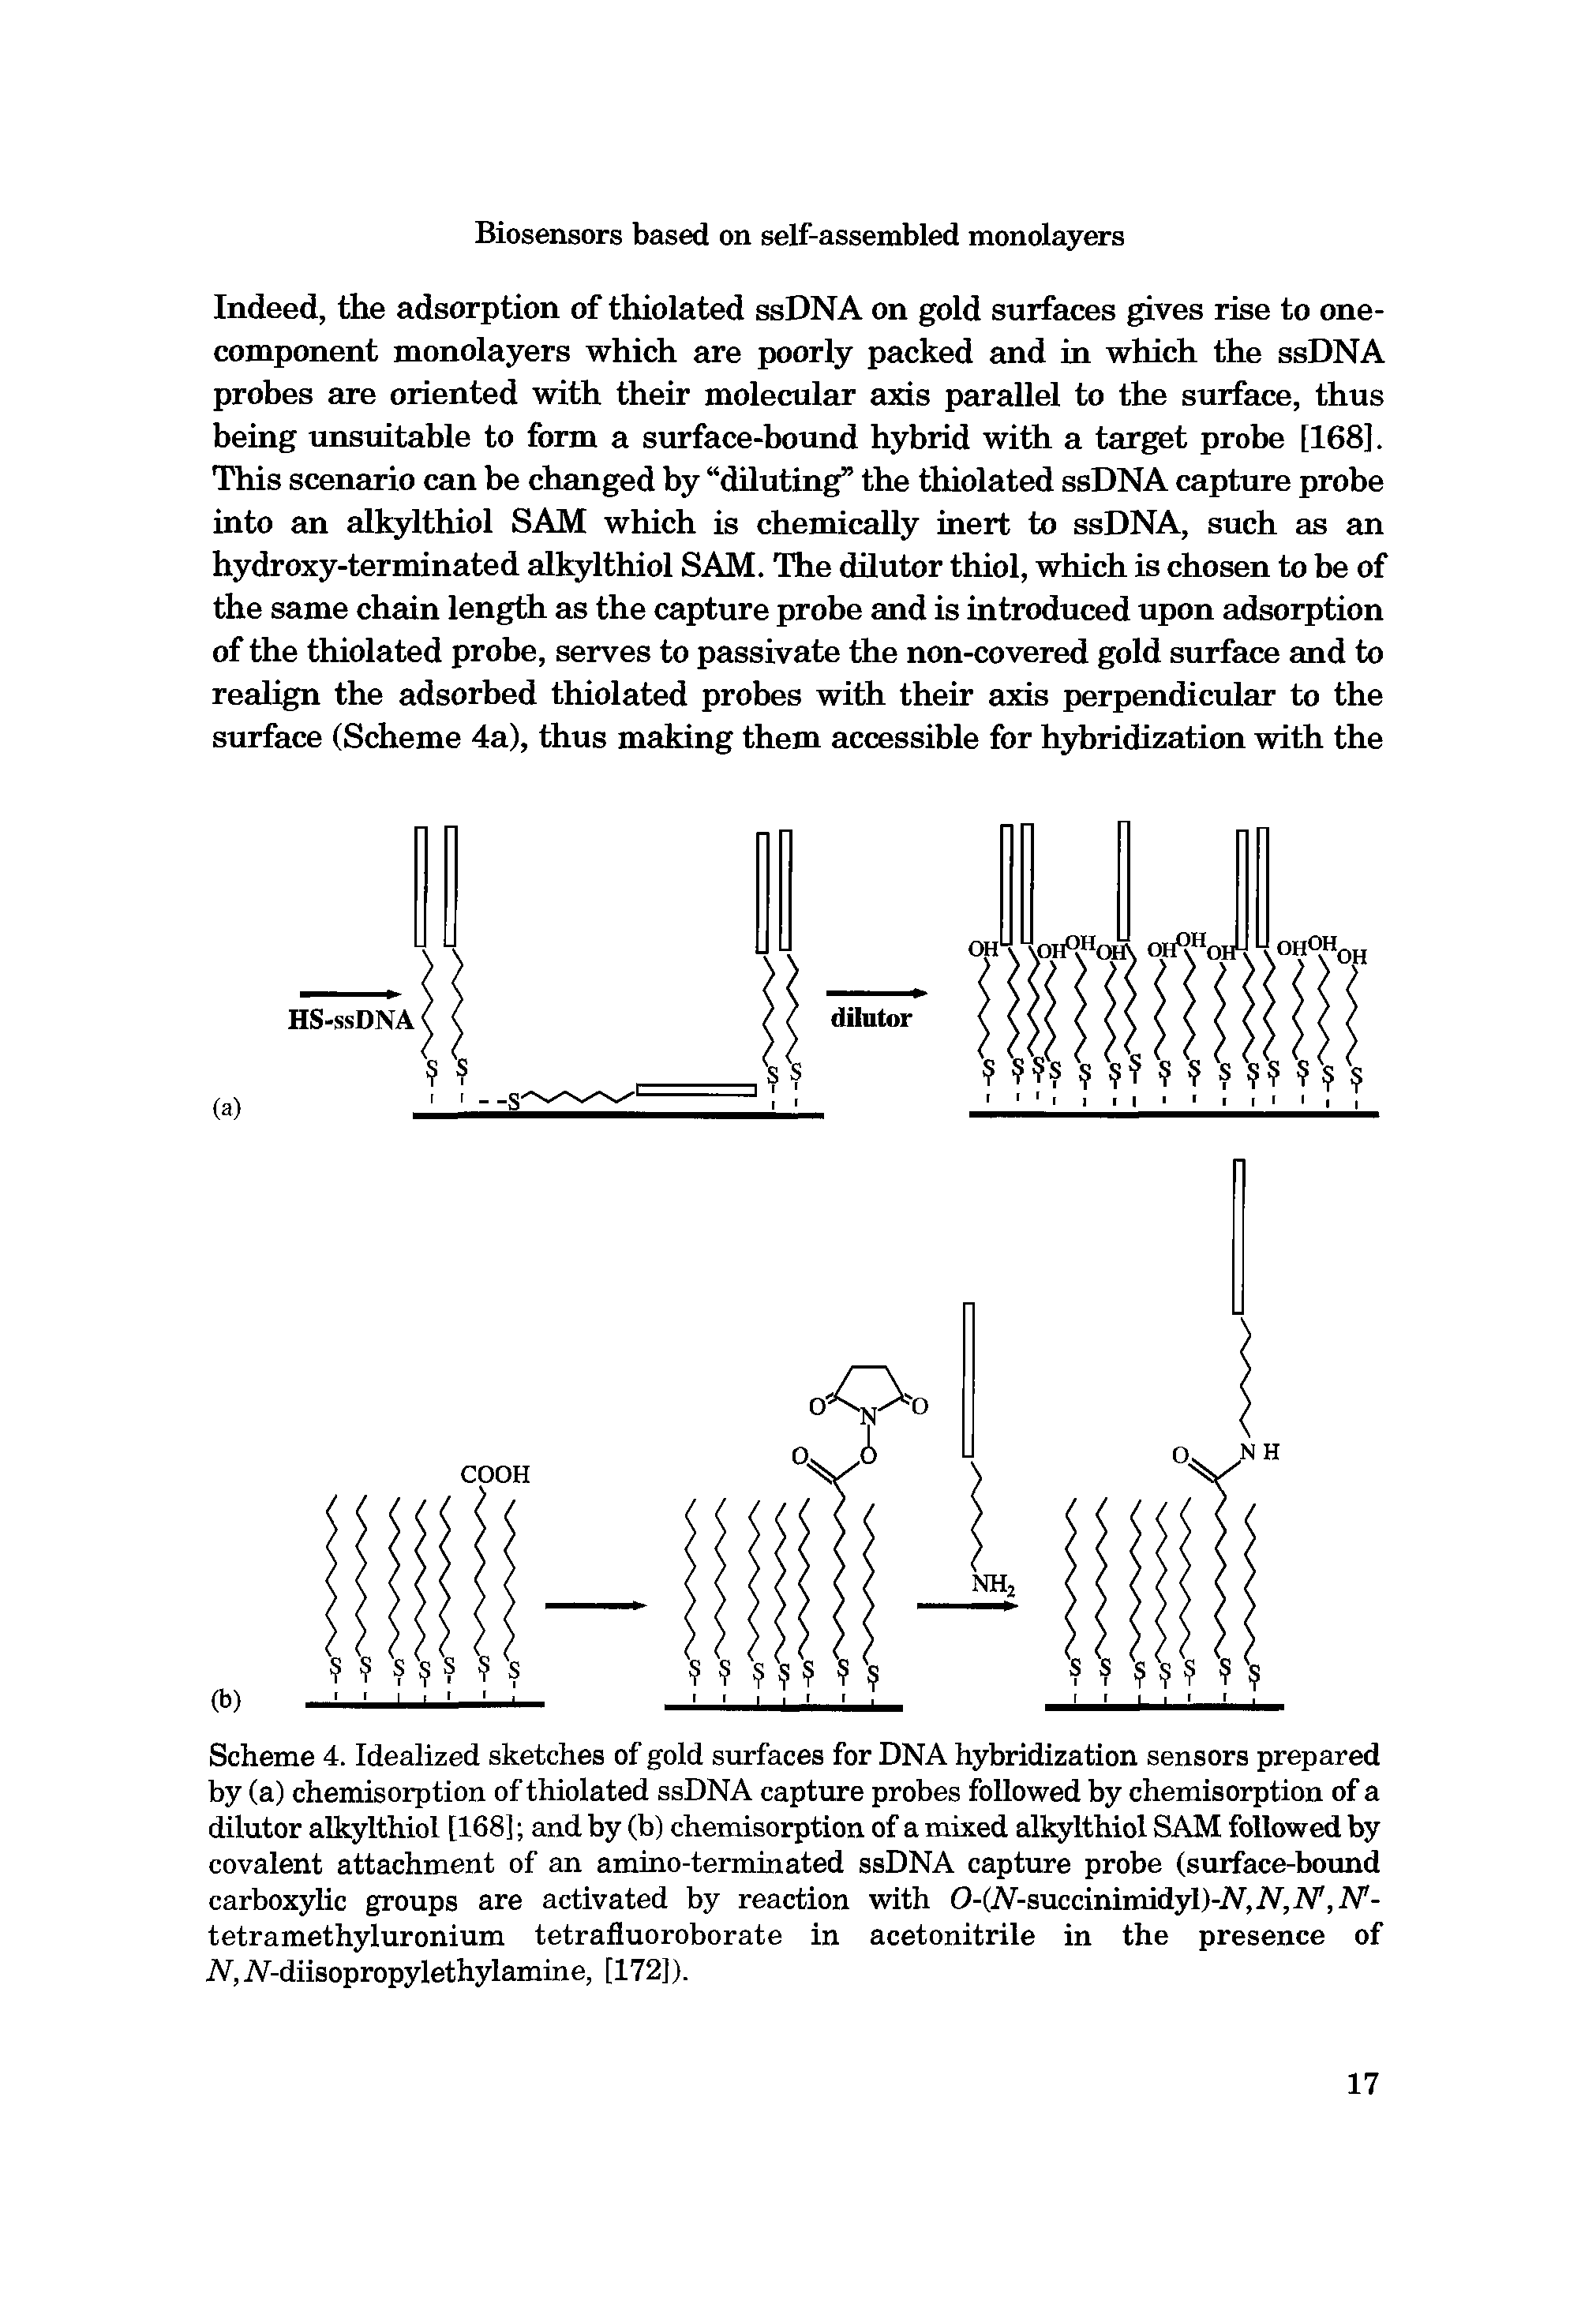 Scheme 4. Idealized sketches of gold surfaces for DNA hybridization sensors prepared by (a) chemisorption of thiolated ssDNA capture probes followed by chemisorption of a dilutor alkylthiol [168] and by (b) chemisorption of a mixed alkylthiol SAM followed by covalent attachment of an amino-terminated ssDNA capture probe (surface-bound carboxylic groups are activated by reaction with 0-(N-auccimrmdyl)-N,N,N, N -tetramethyluronium tetrafluoroborate in acetonitrile in the presence of N, A-diisopropylethylamine, [172]).